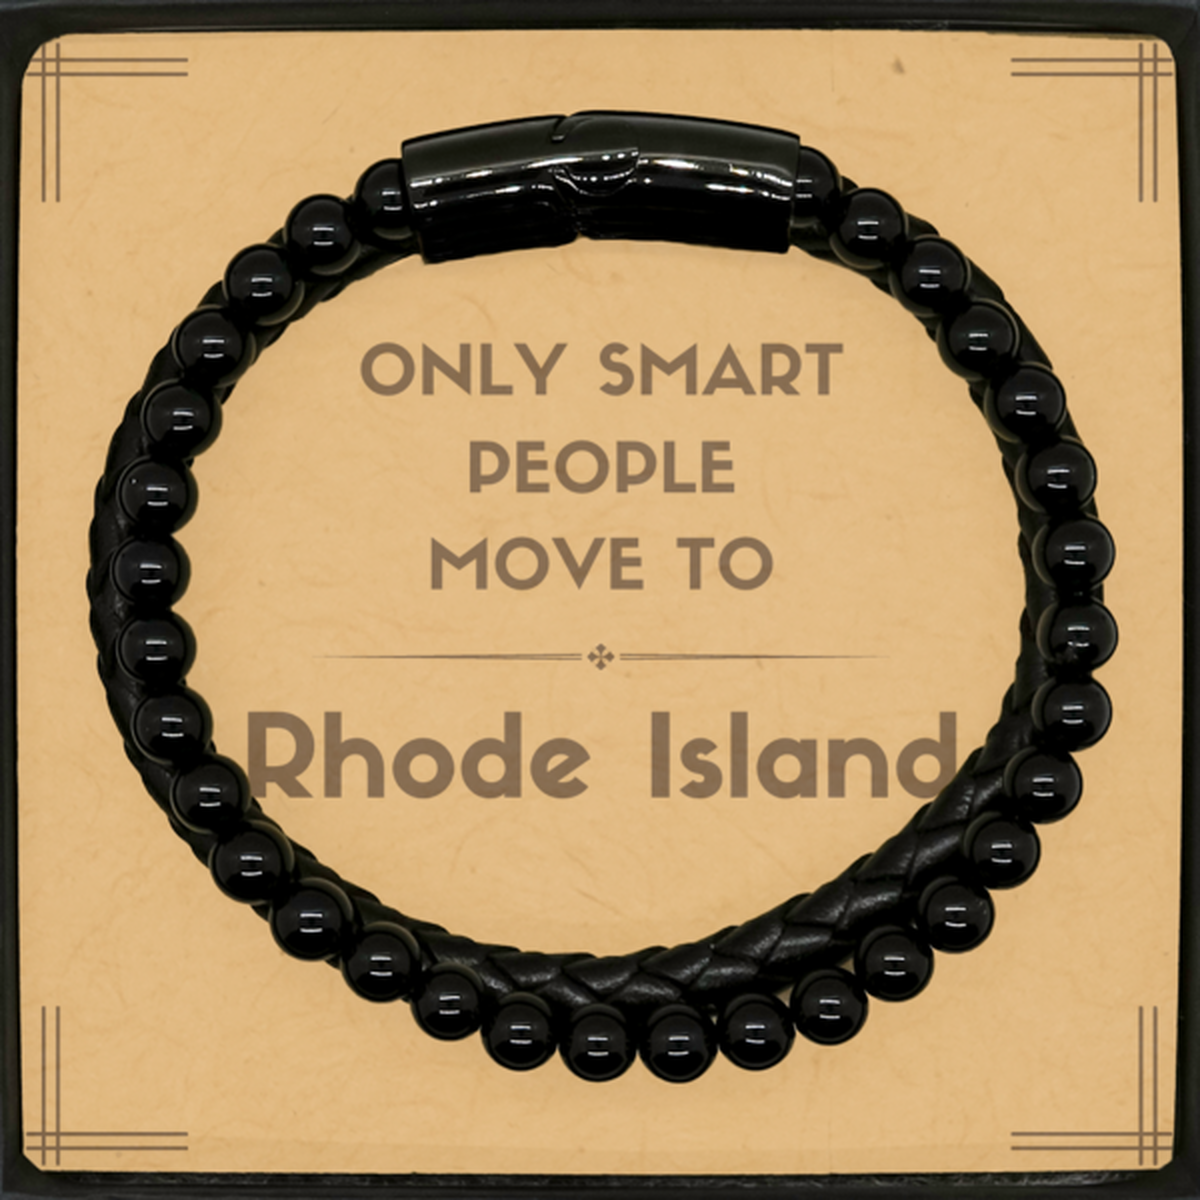 Only smart people move to Rhode Island Stone Leather Bracelets, Message Card Gifts For Rhode Island, Move to Rhode Island Gifts for Friends Coworker Funny Saying Quote